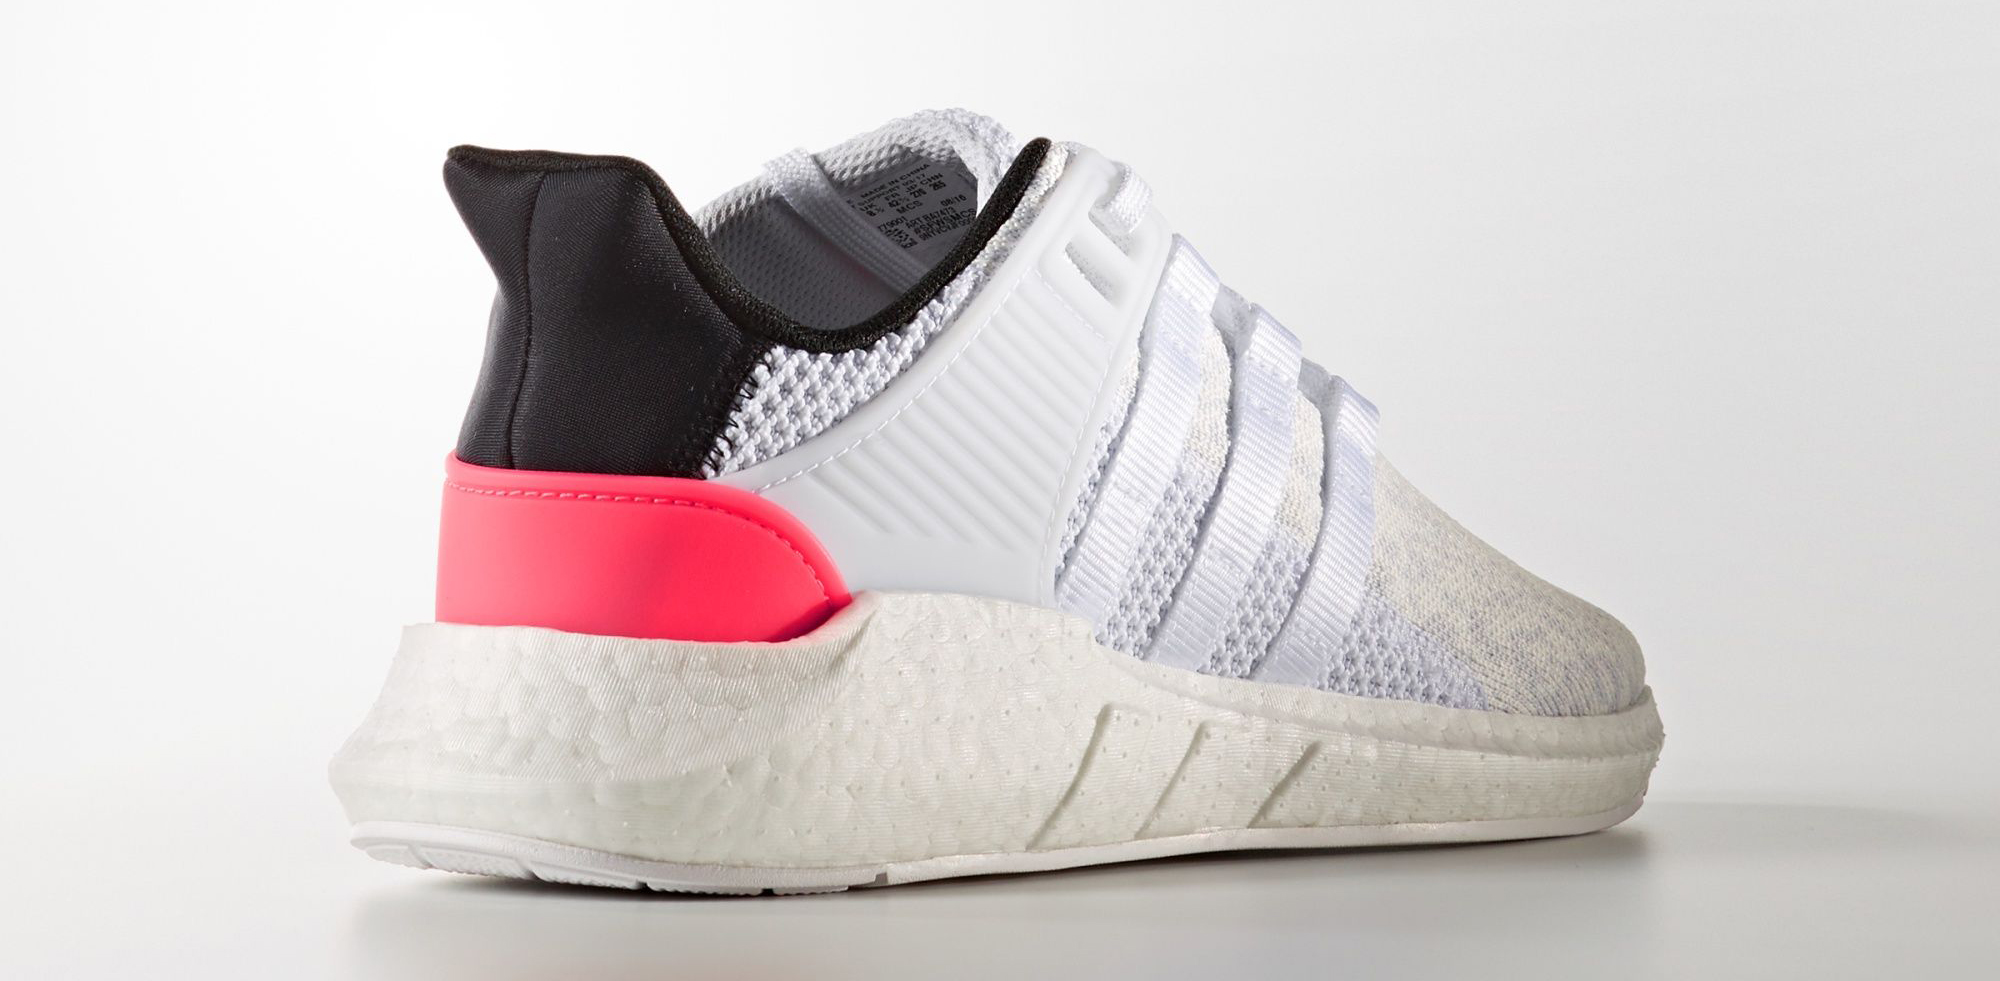 adidas-eqt-support-9317-white-turbo-red-1